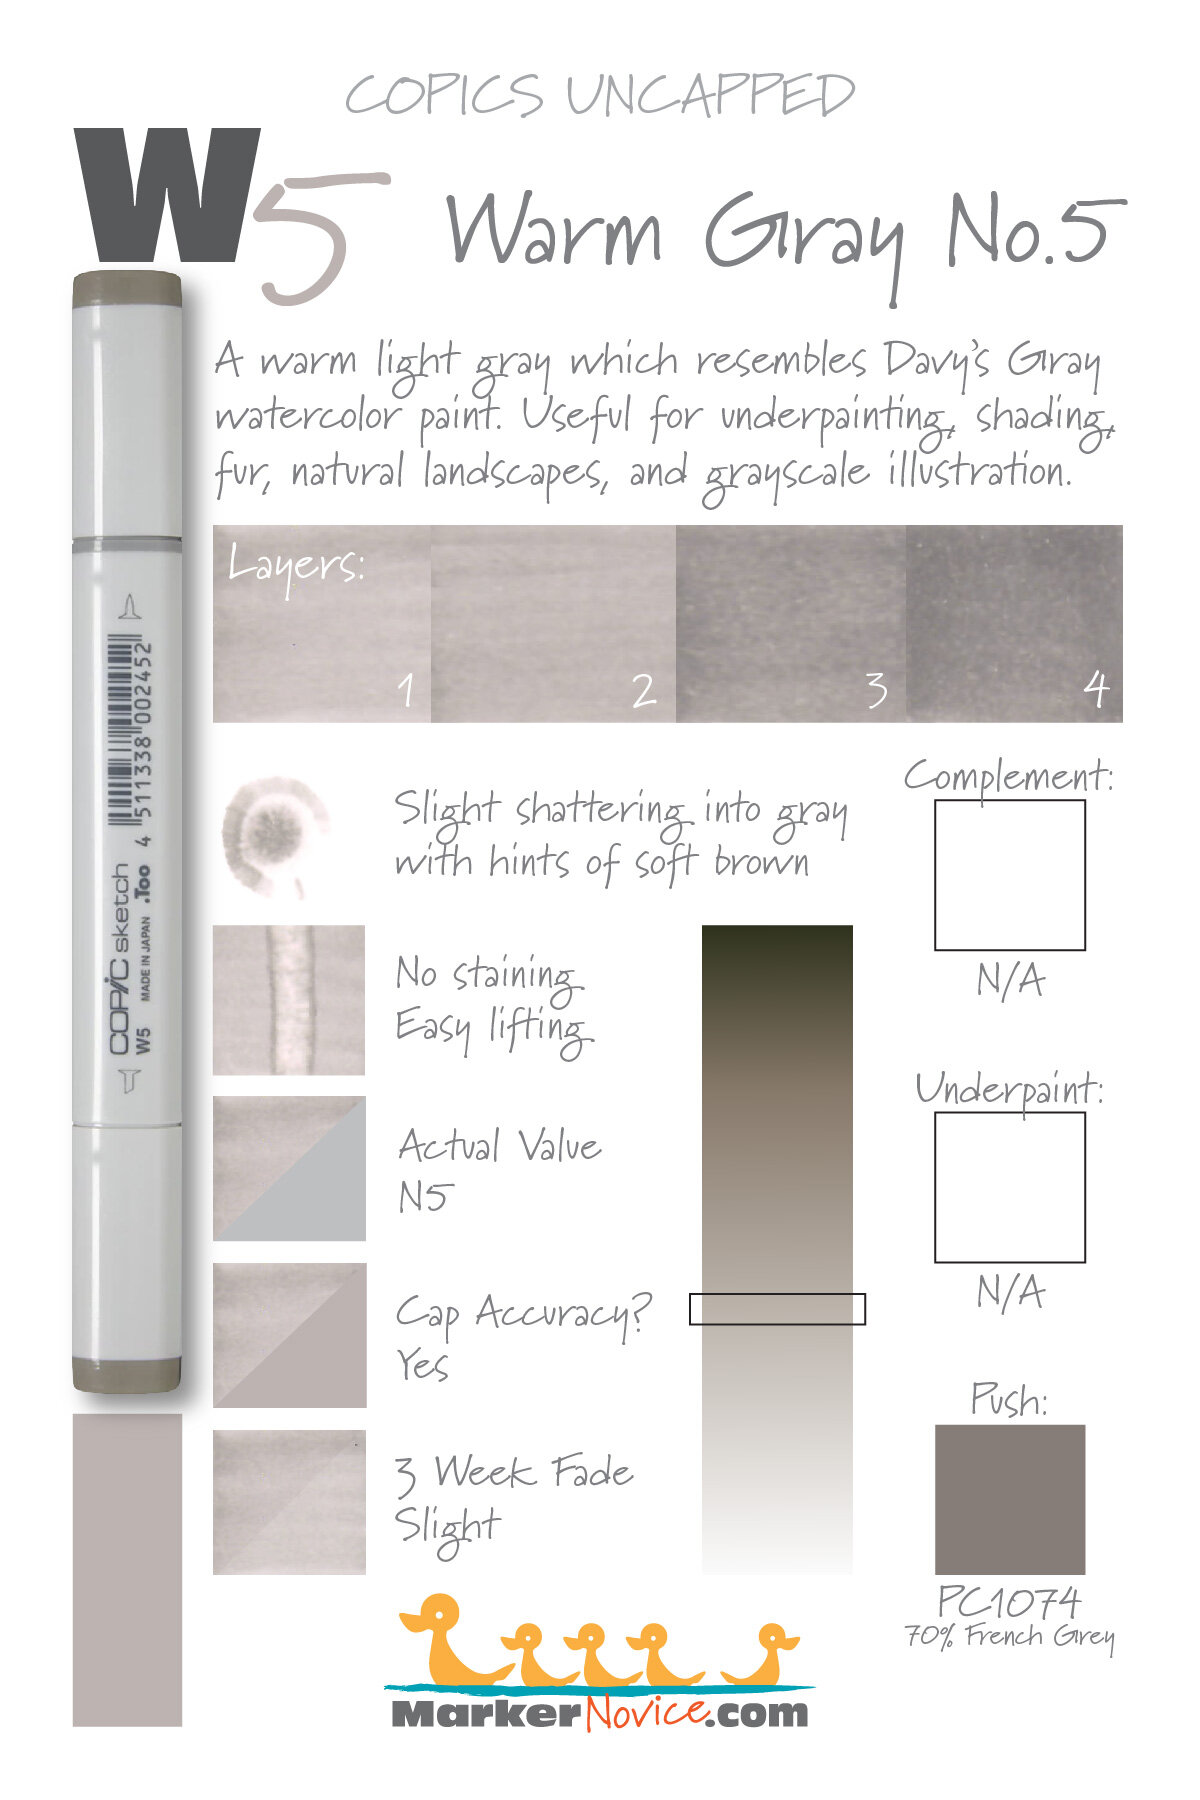 50 SHADES OF GREY MARKERS: HOW TO DECIDE WHAT YOU NEED